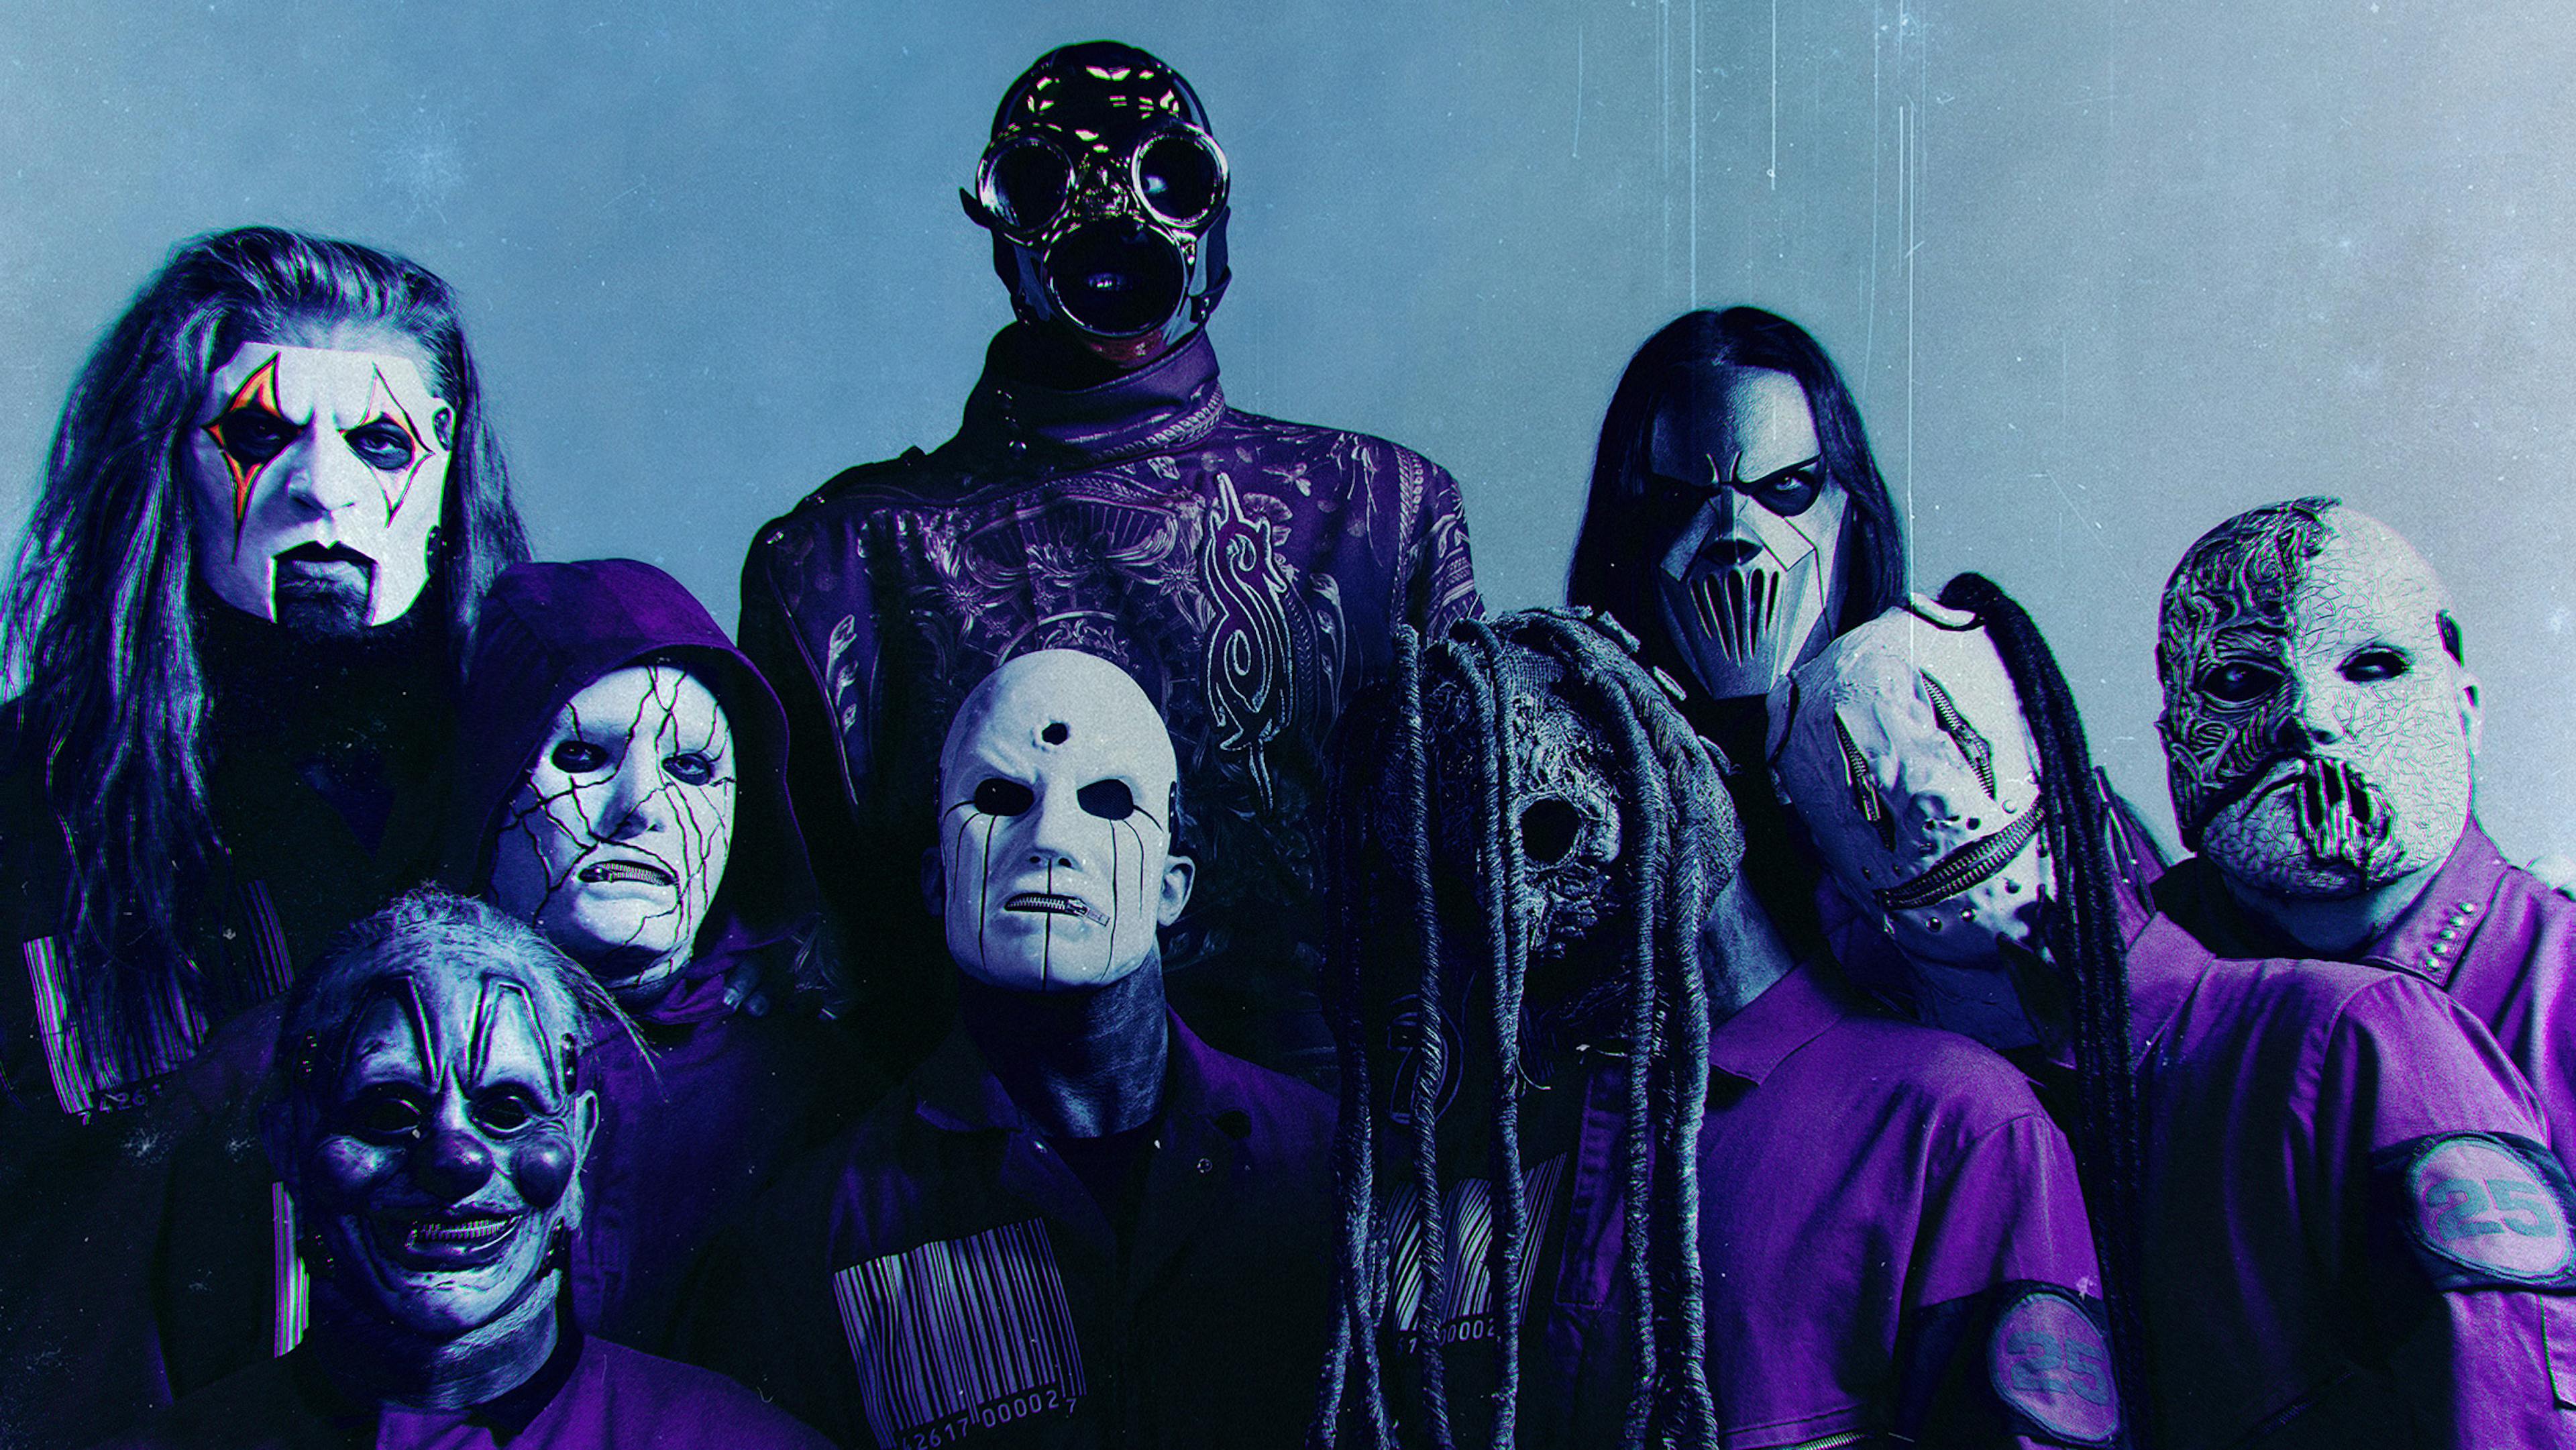 Slipknot announce U.S. tour with Knocked Loose, Orbit Culture and Vended